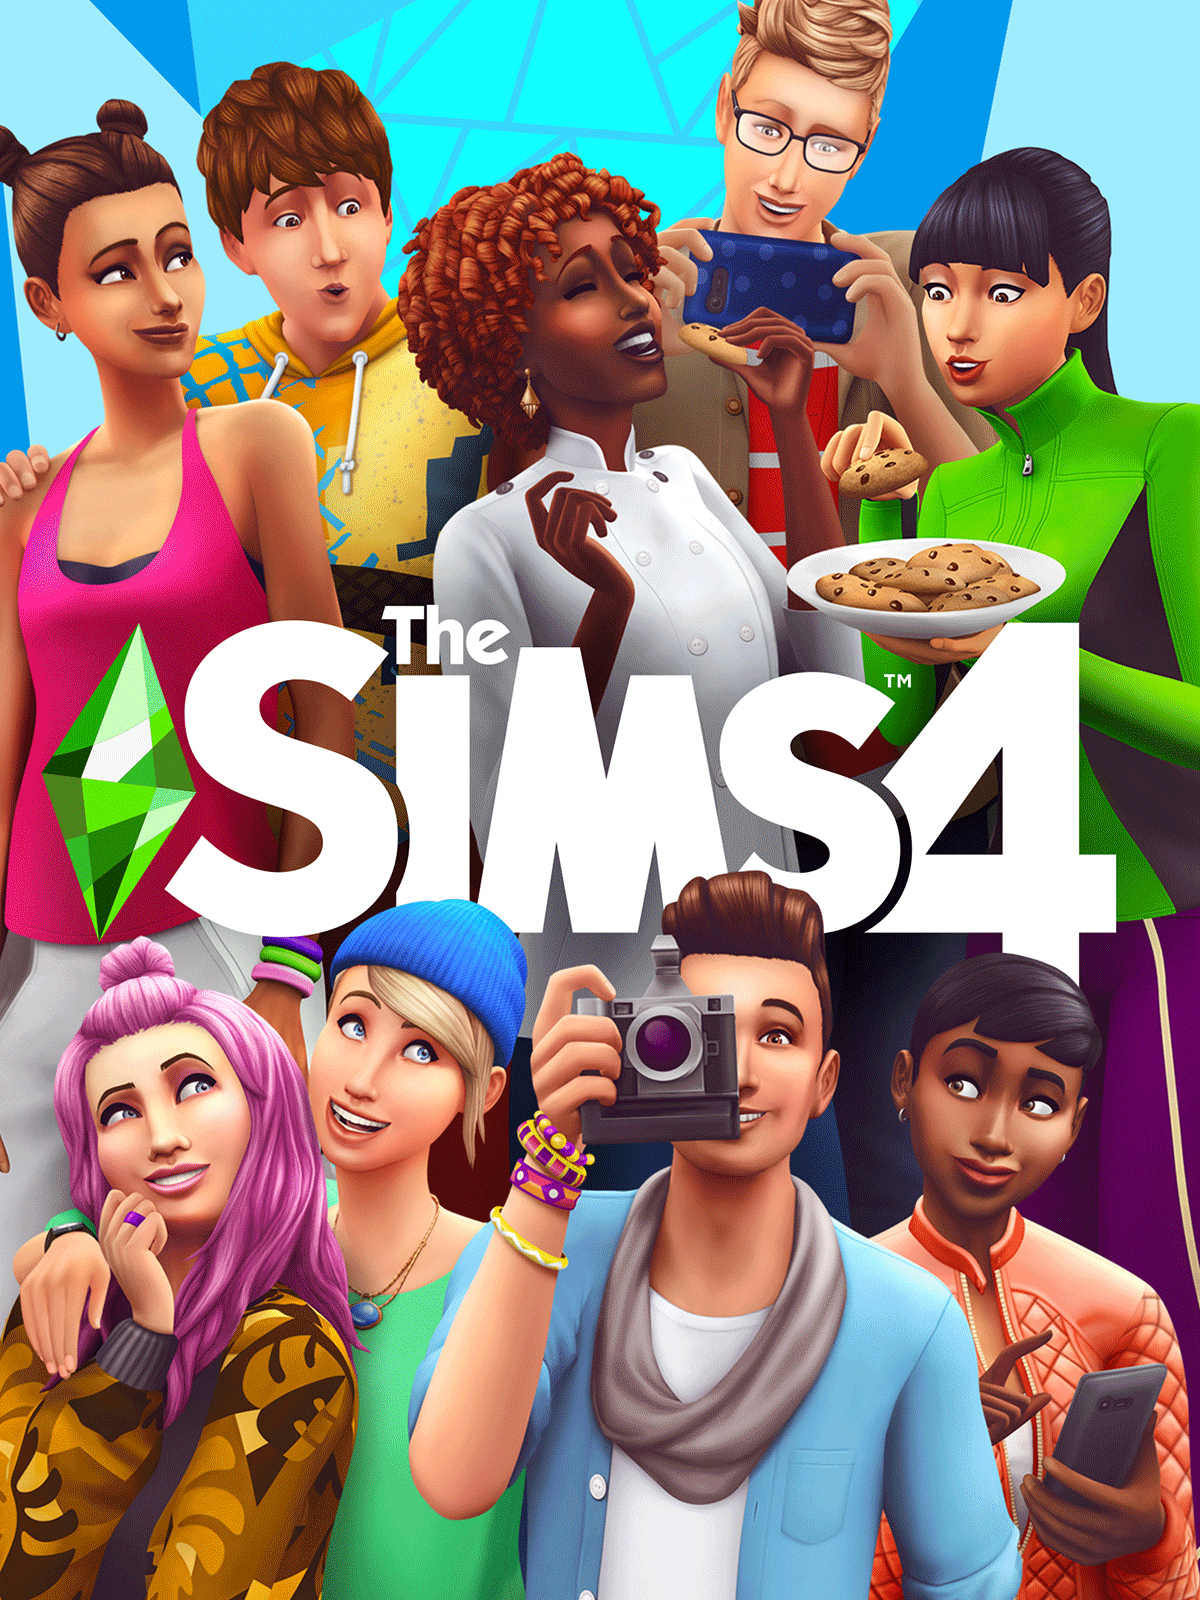 EGS TheSims4 ElectronicArts S2 1200x1600 ceadc3bd1e6f885ad64d9f115f51f5c0 | The Sims 4 | The Sims 4 For Rent Expansion Pack DLC ใหม่สไตล์เอเชียตะวันออกเฉียงใต้!